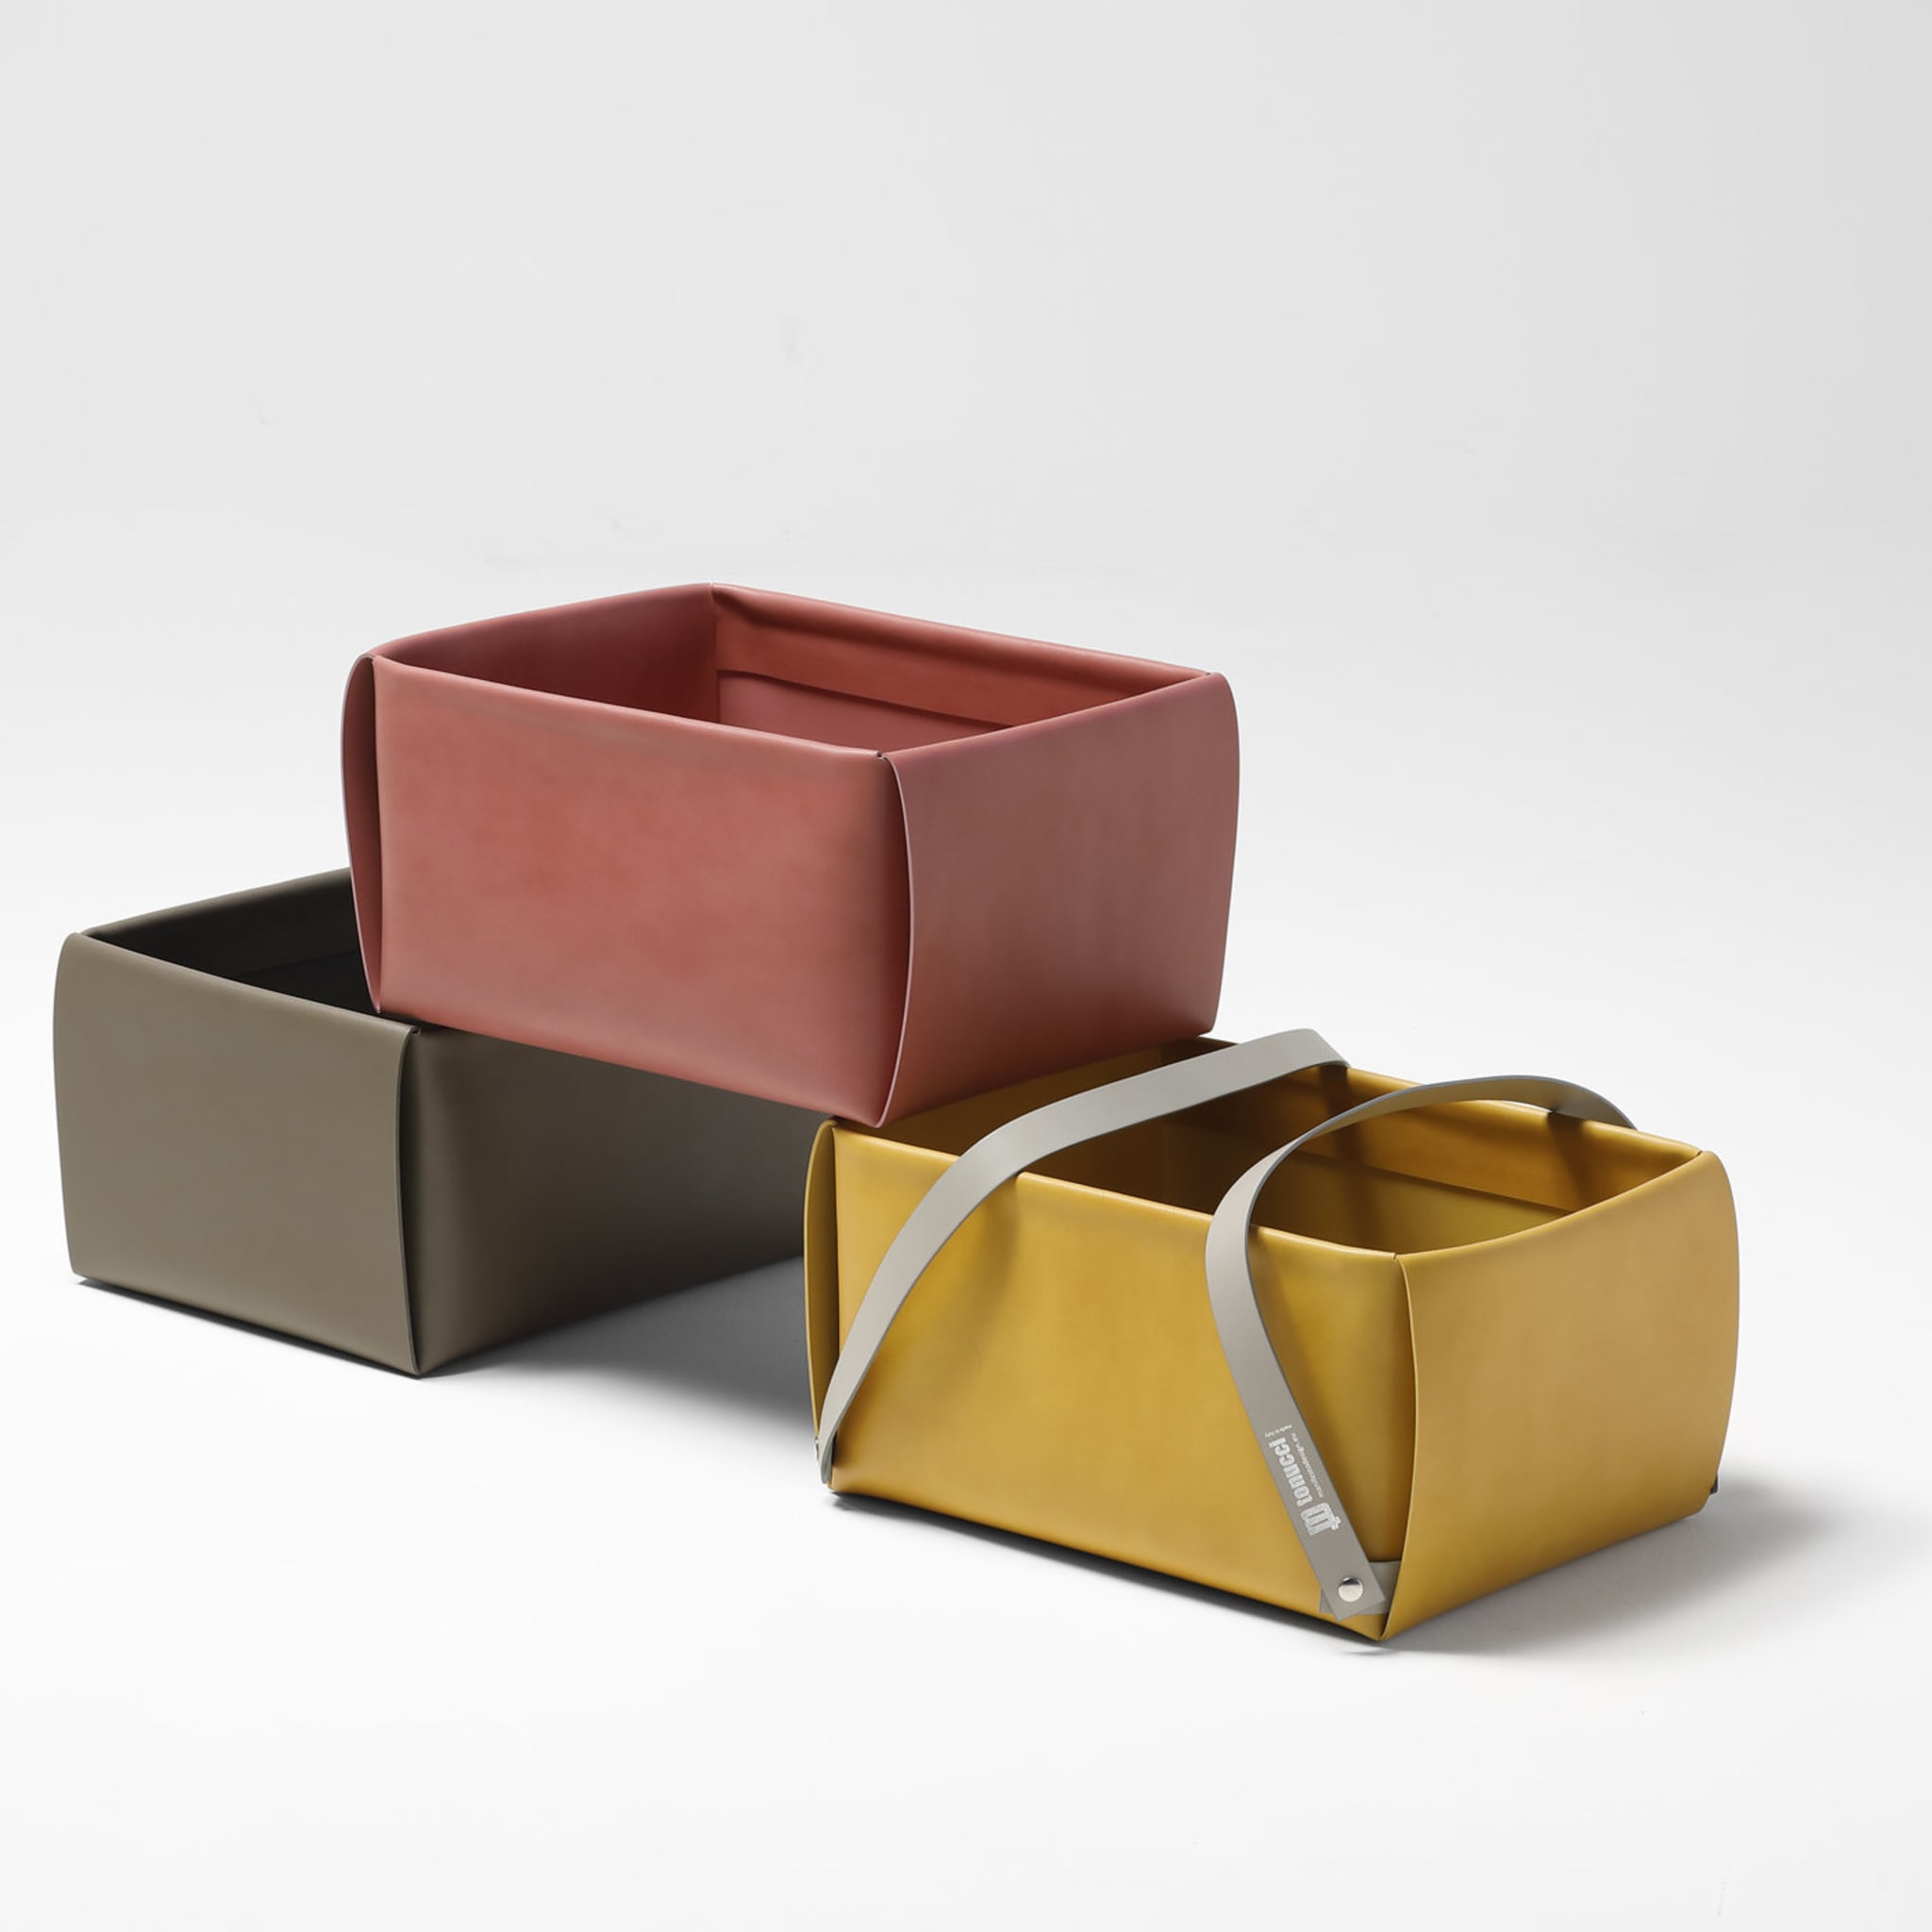 Lullabao Yellow Leather Basket with Handles by Viola Tonucci - Alternative view 1